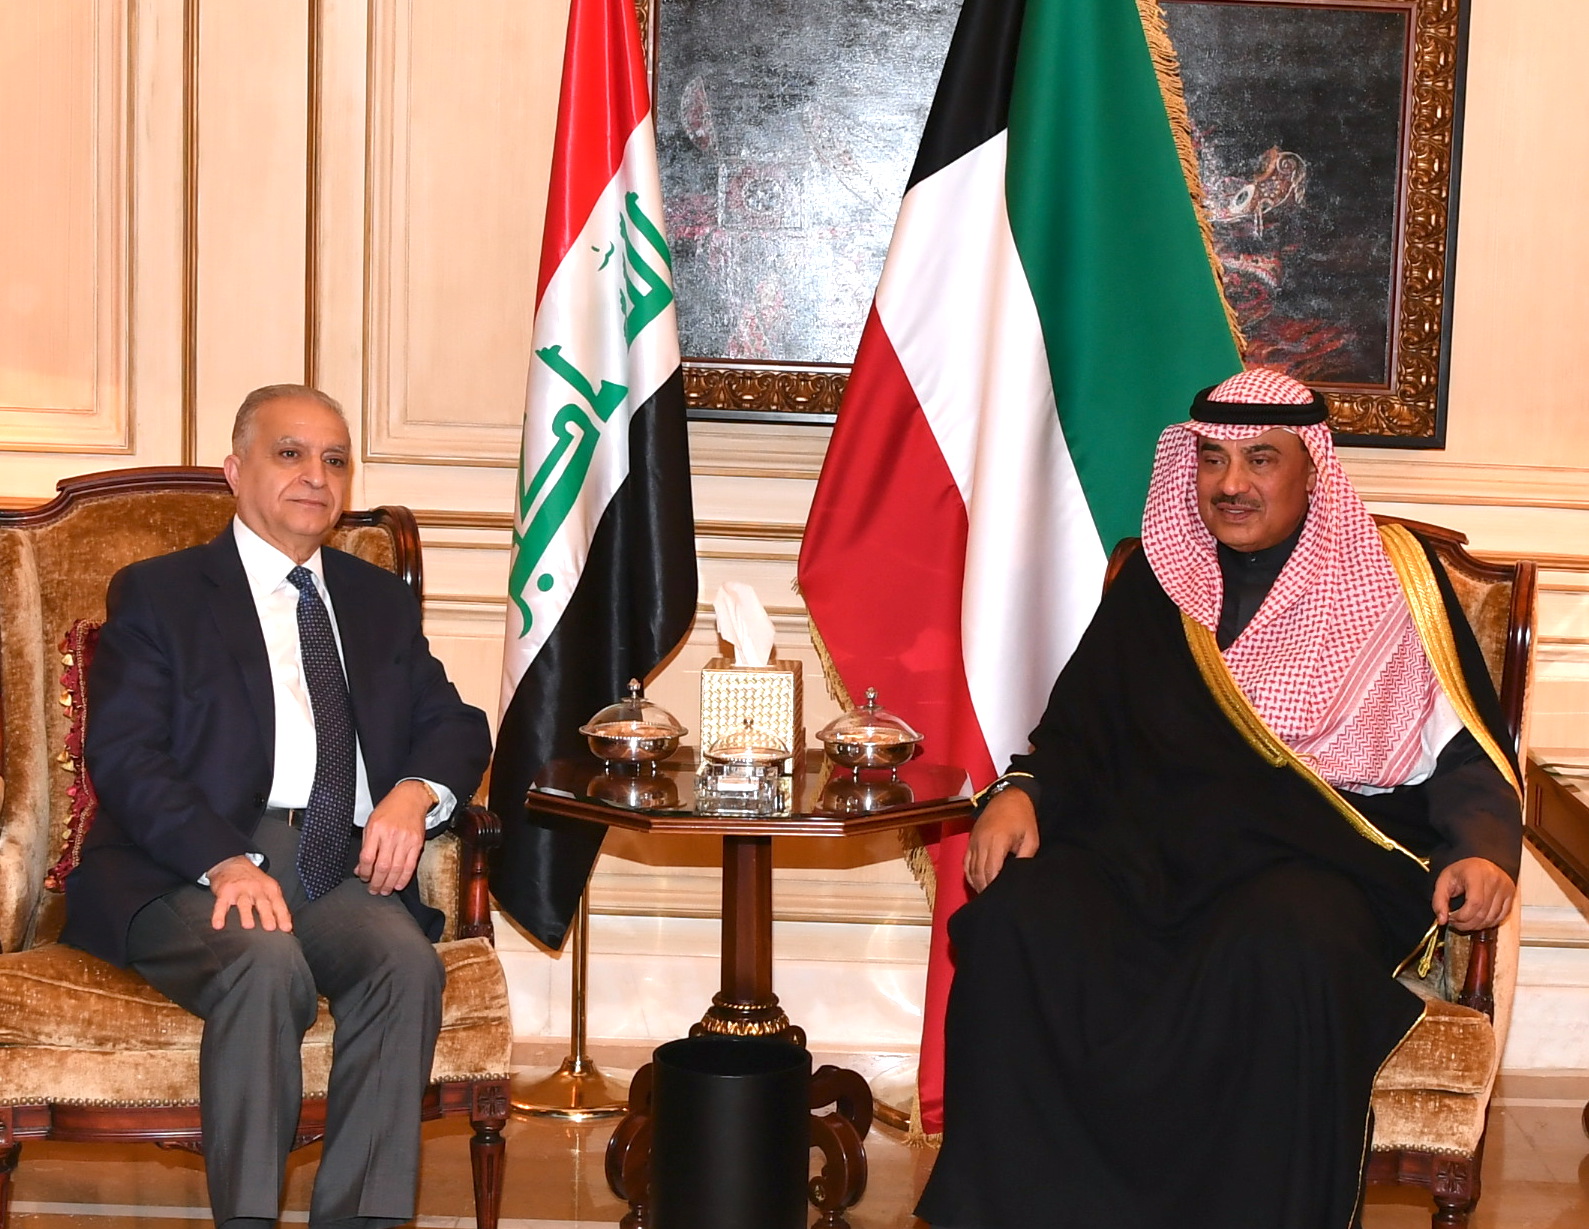 Representative of His Highness the Amir, Deputy Prime Minister and Foreign Minister Sheikh Sabah Al-Khaled meets Iraq's Foreign Minister Mohamed Ali Al-Hakim